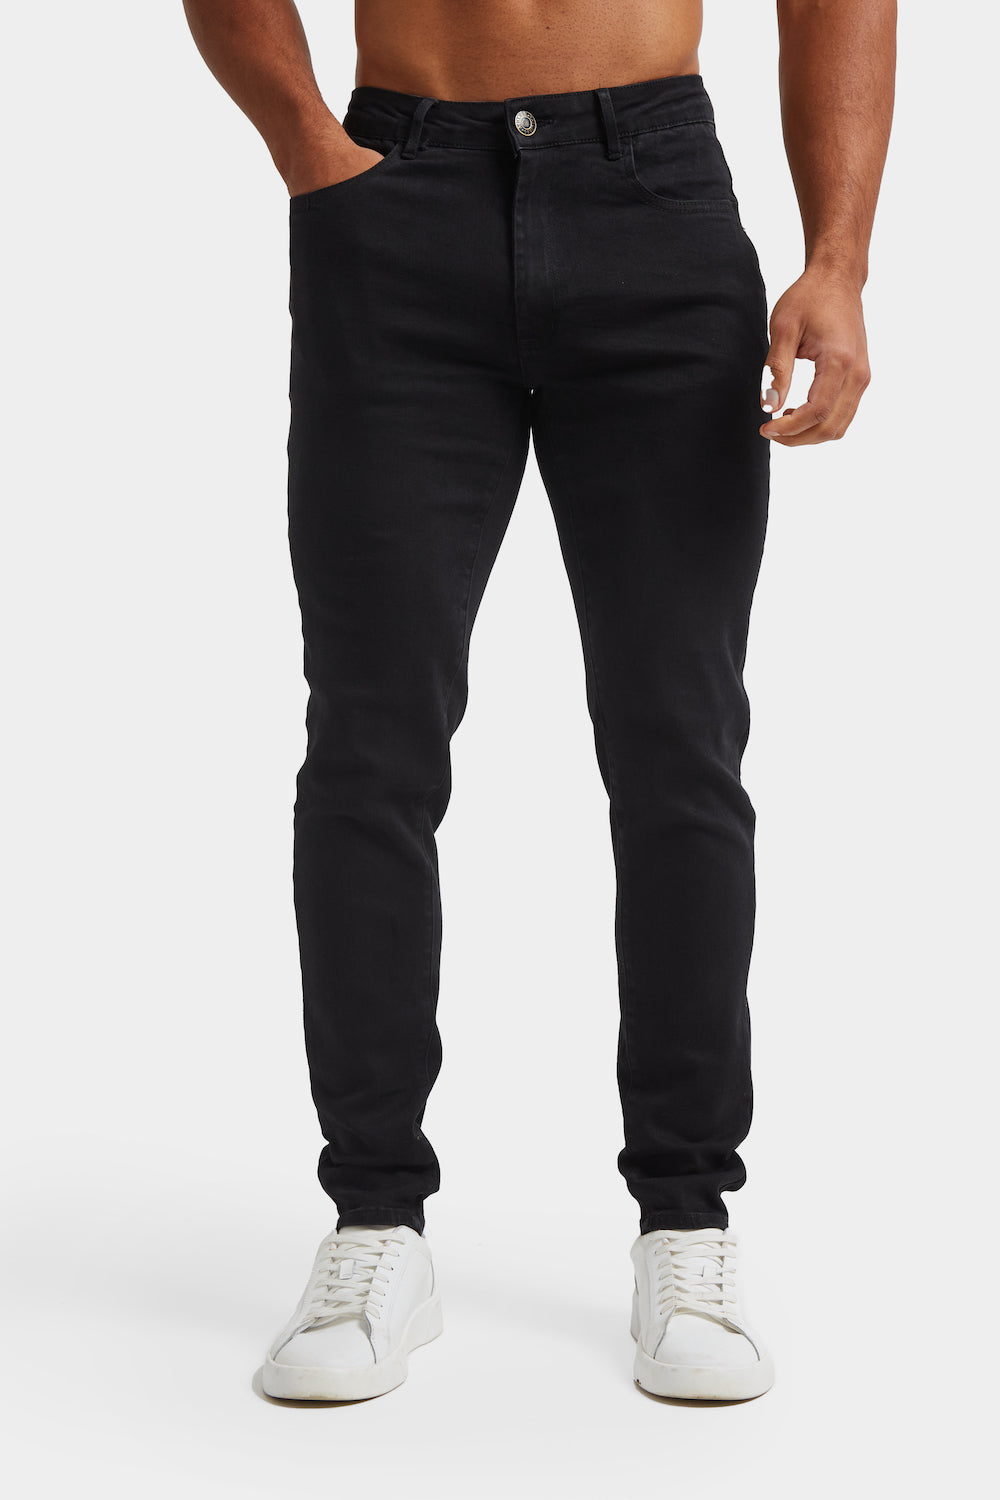 Muscle Fit Jeans - TAILORED ATHLETE - ROW